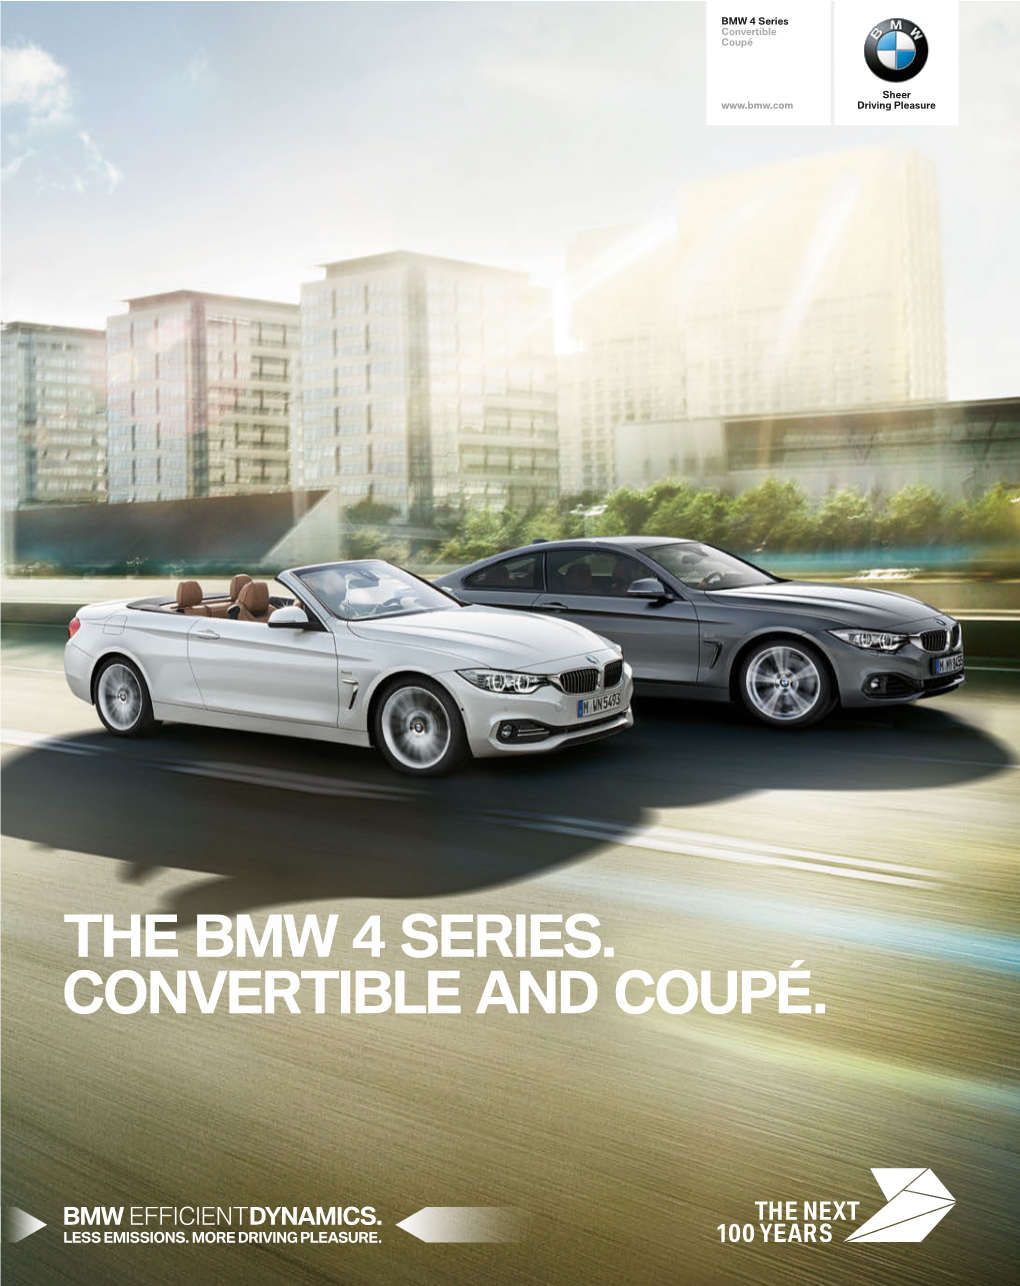 The Bmw 4 Series. Convertible and Coupé